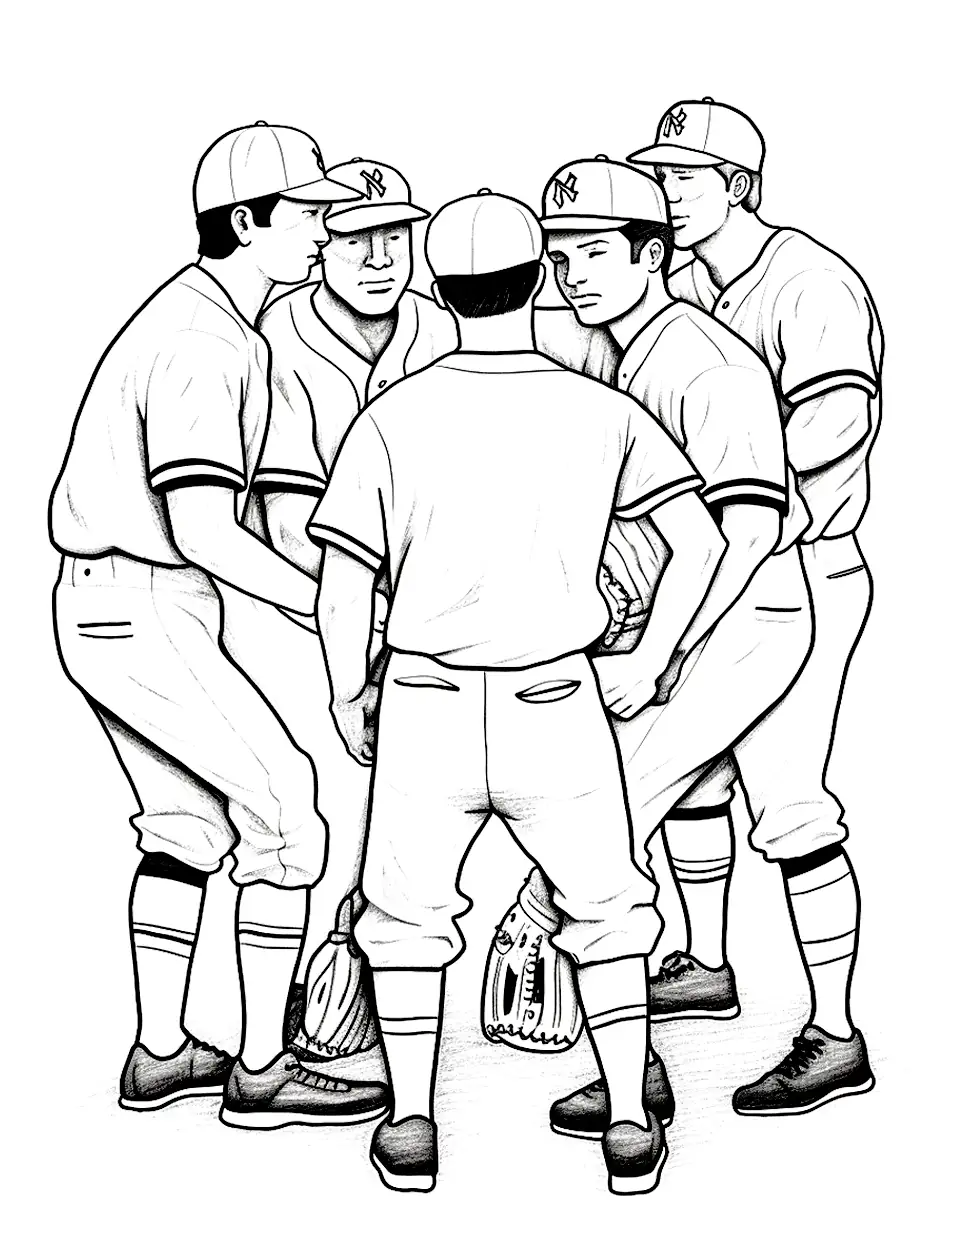 Team Huddle Baseball Coloring Page - A pro team gathered in a huddle, discussing strategy with excitement.